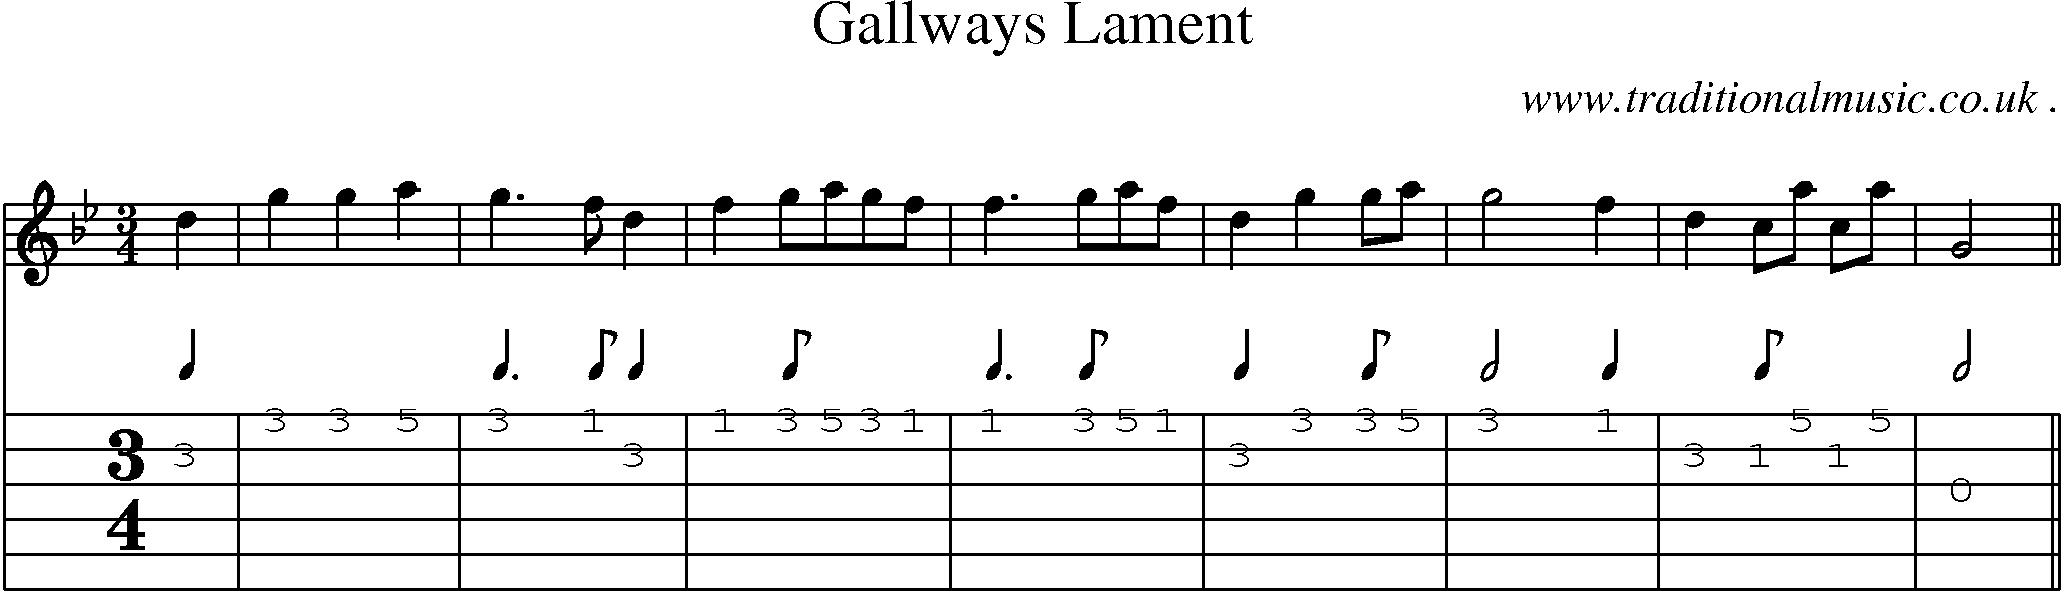 Sheet-Music and Guitar Tabs for Gallways Lament